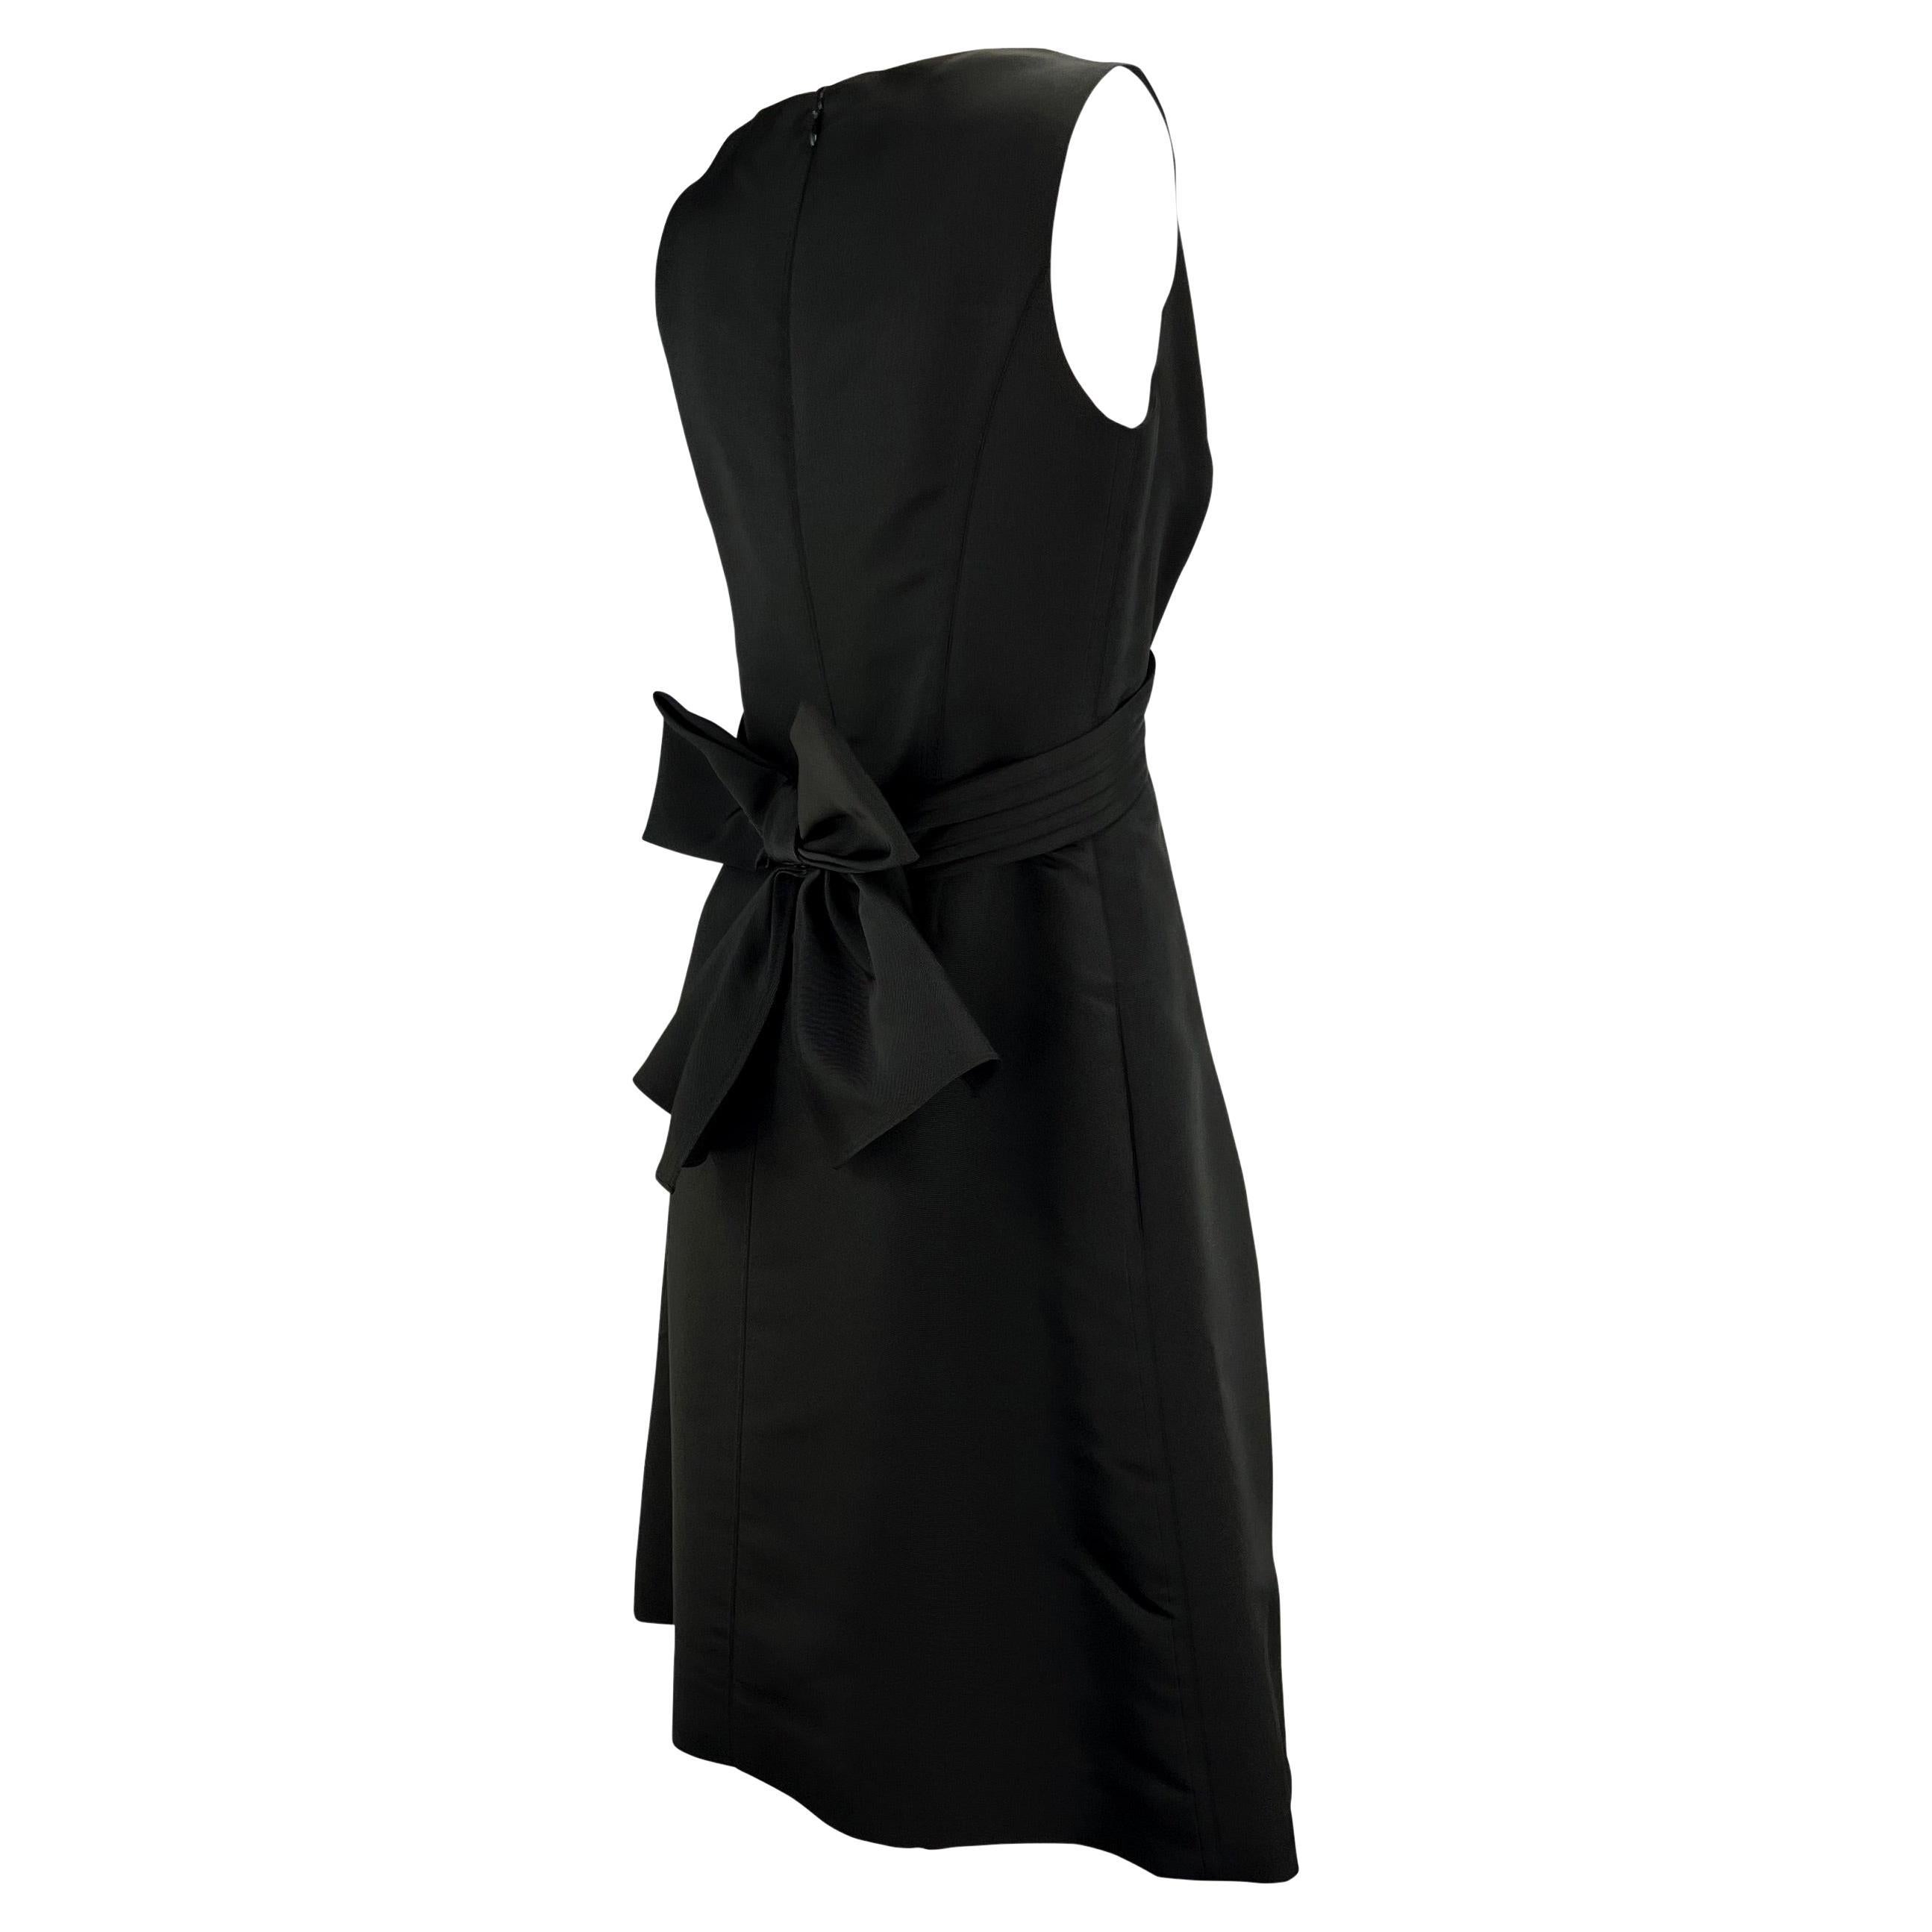 Women's 1990s Bill Blass Couture Black Bow Sleeveless Cocktail Dress For Sale